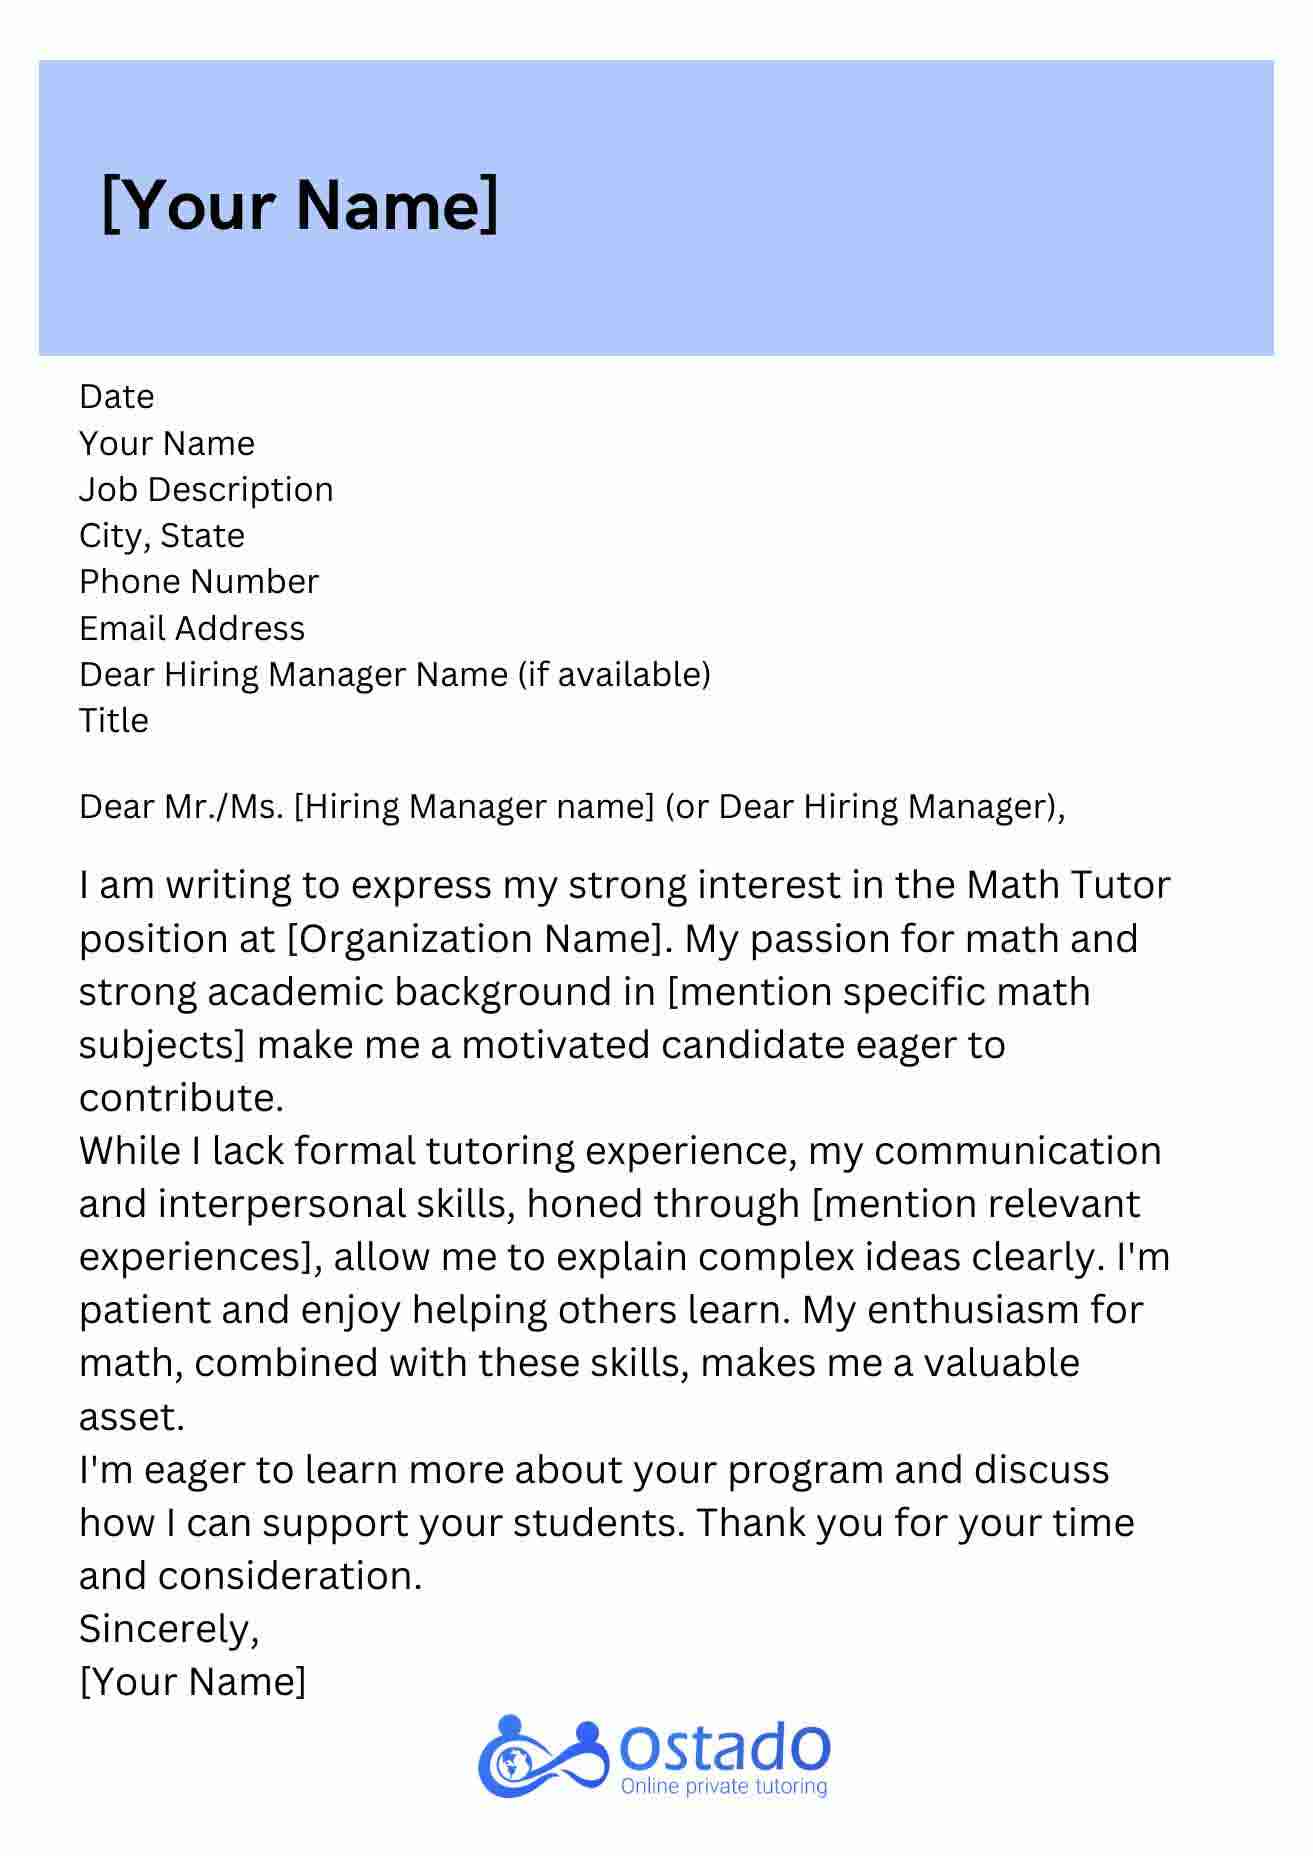 maths tutor cover letter no experience 